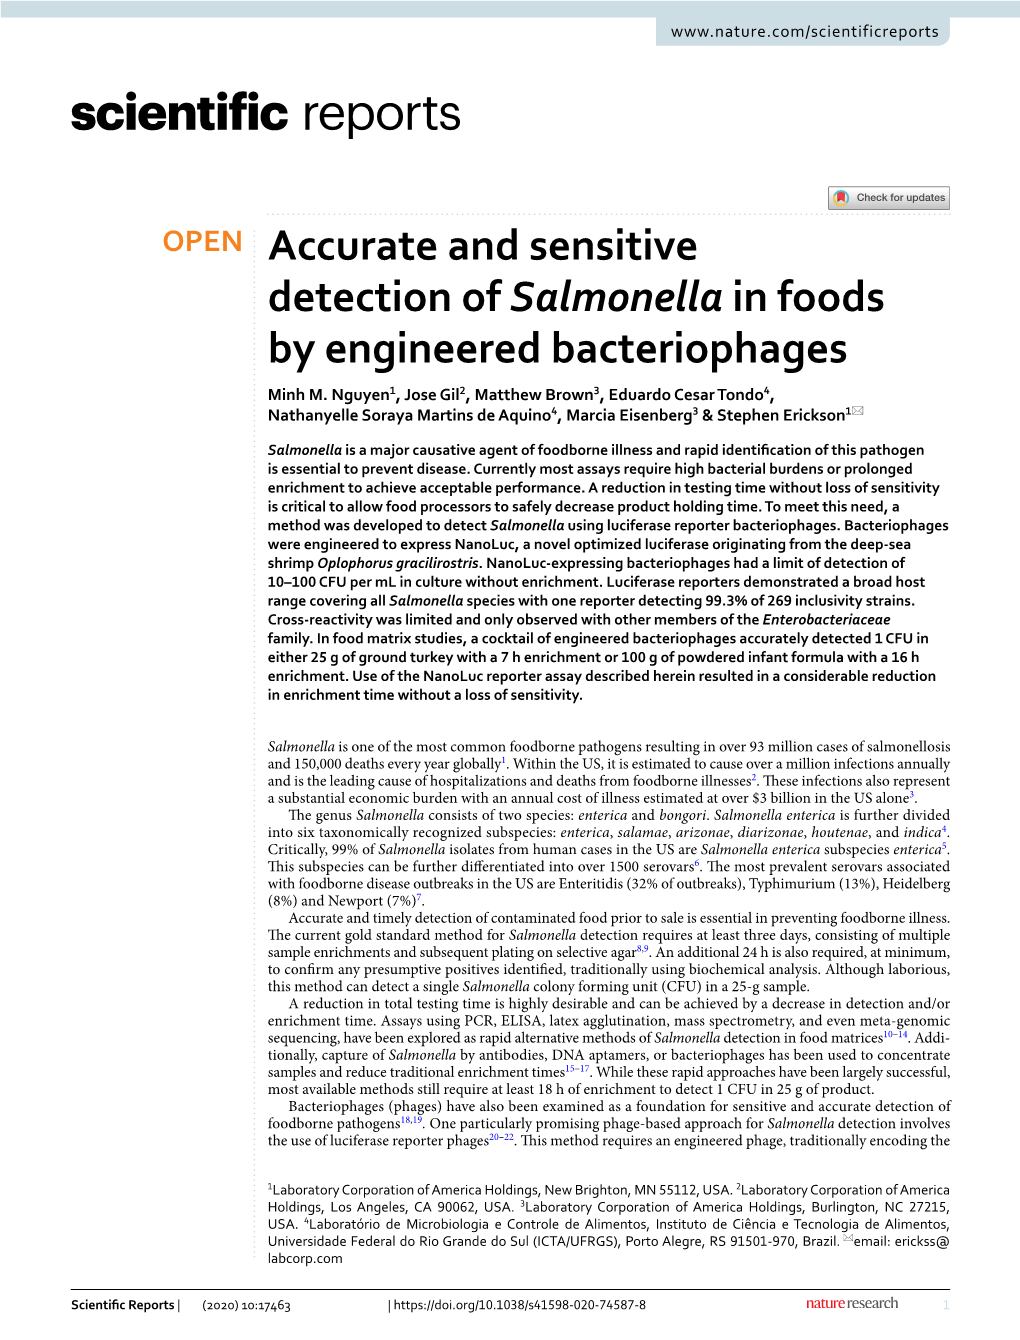 Accurate and Sensitive Detection of Salmonella in Foods by Engineered Bacteriophages Minh M